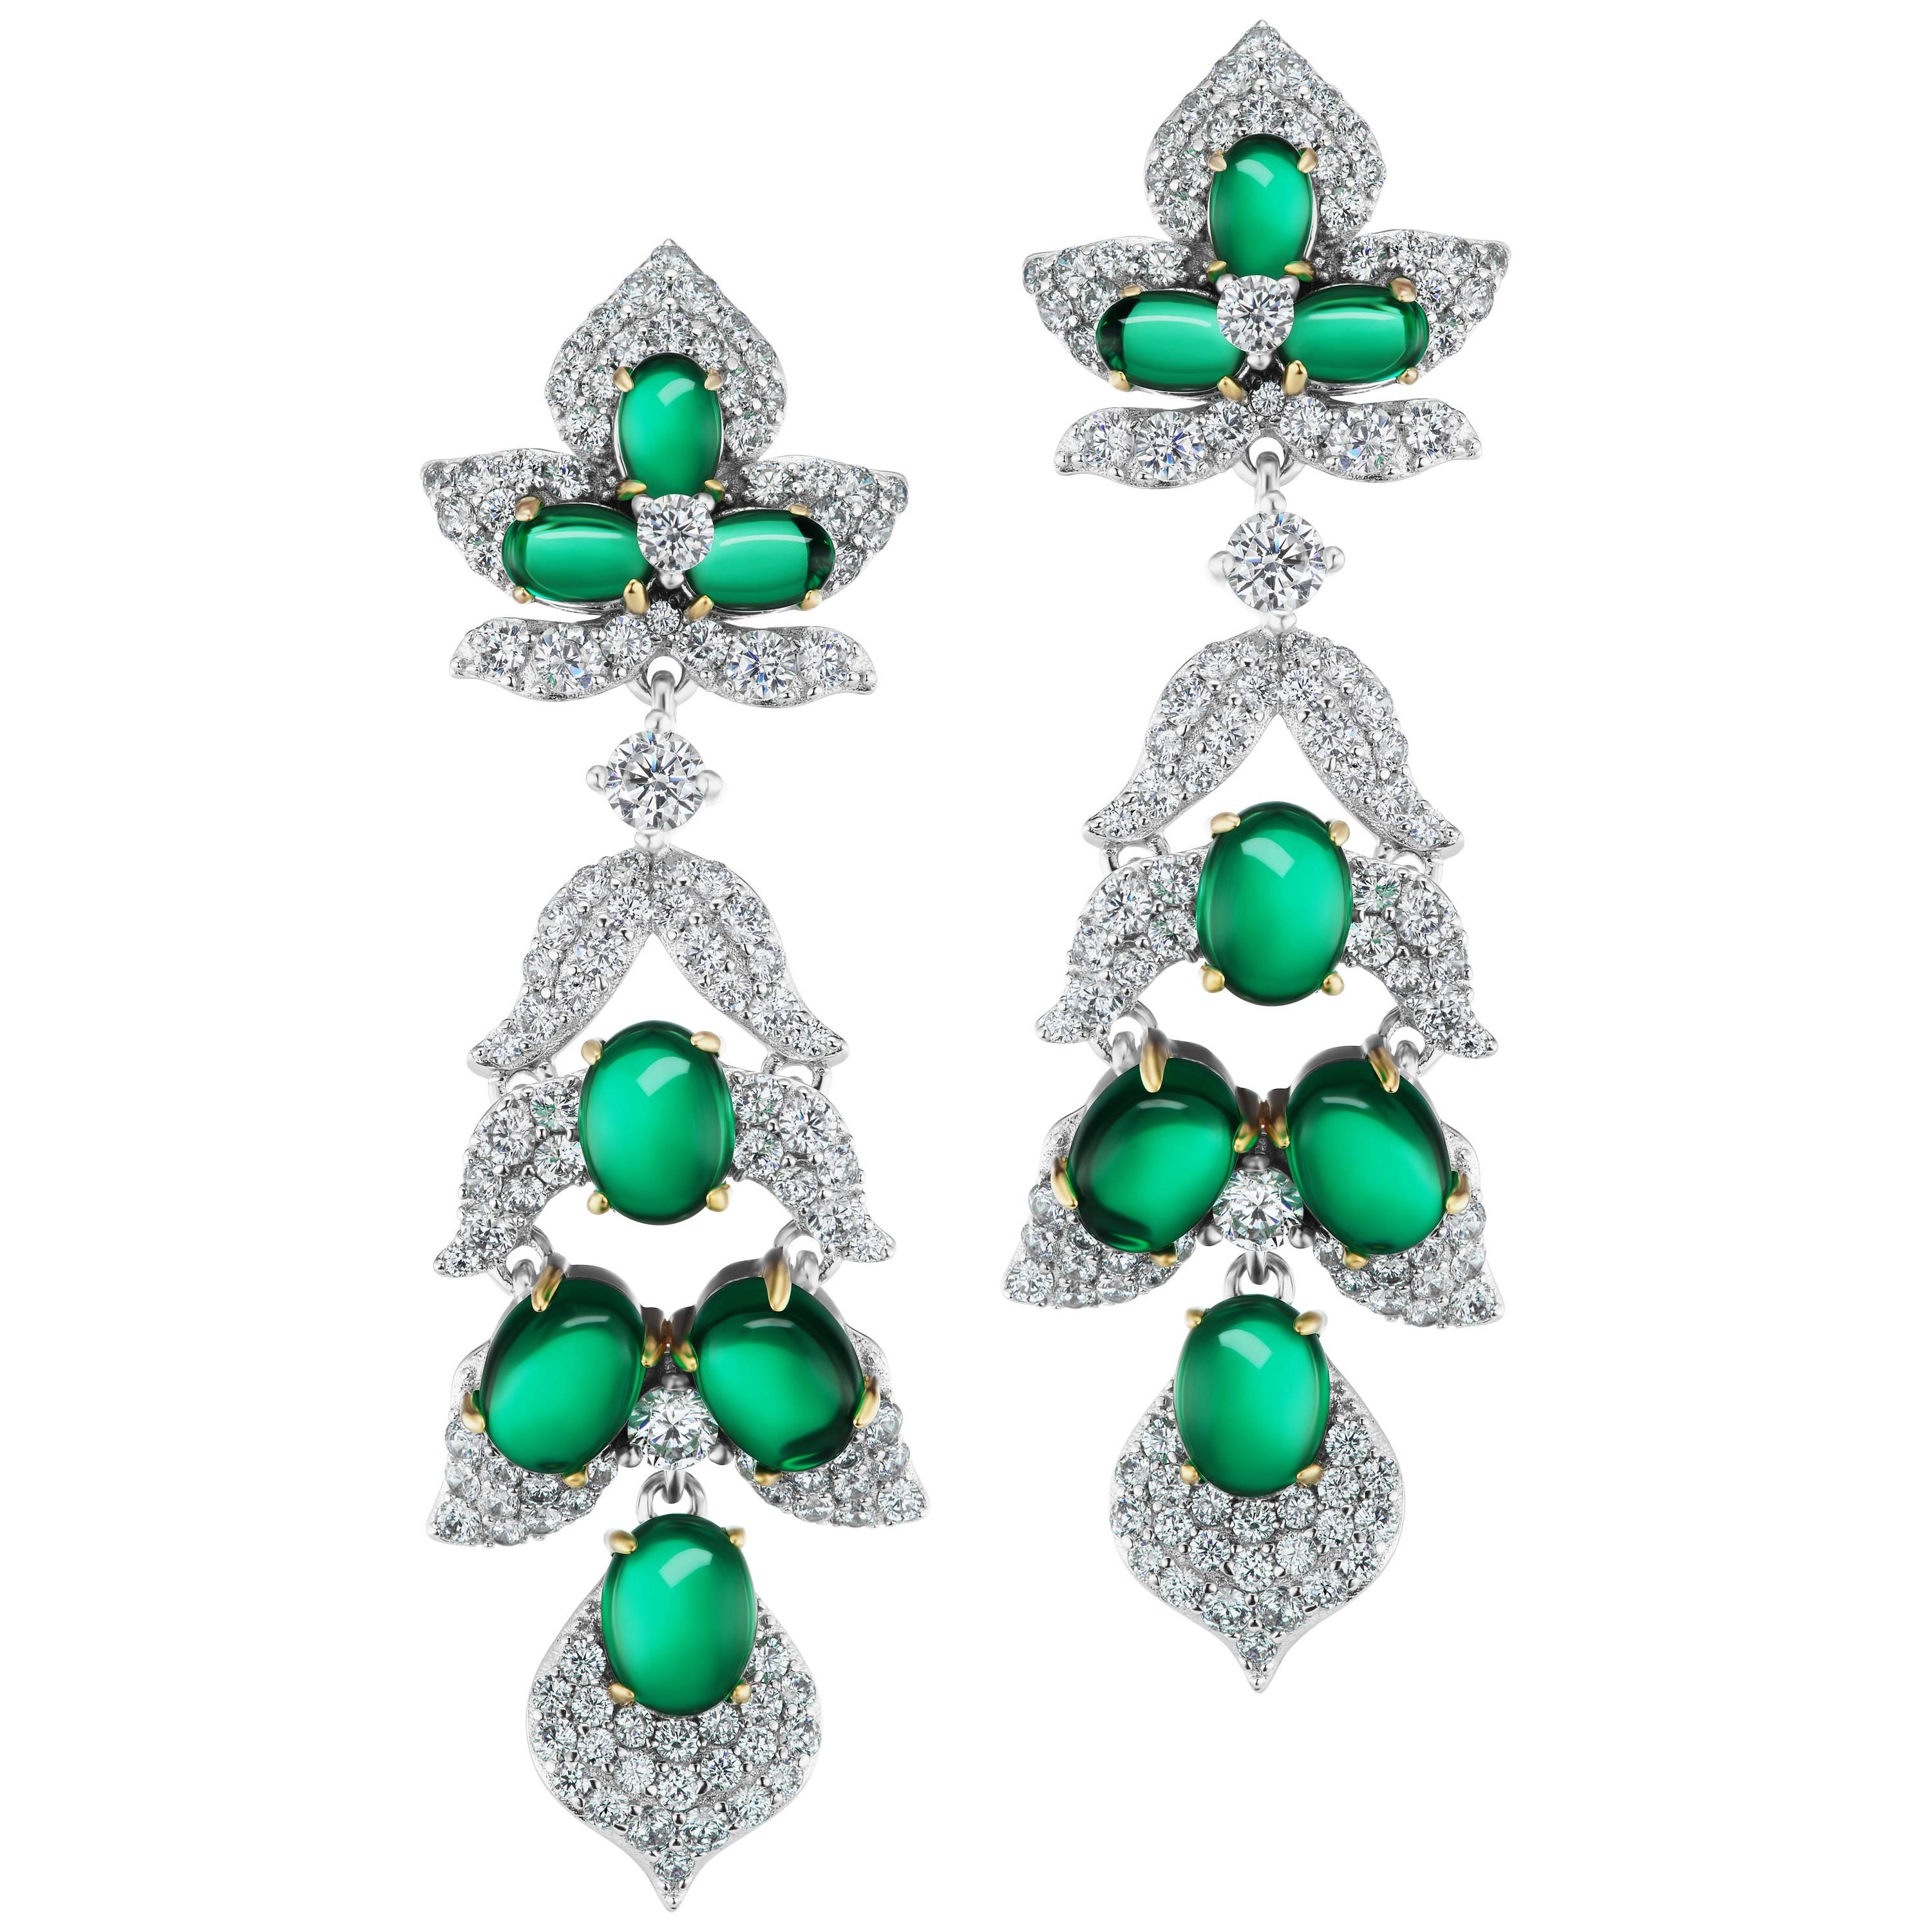 Faux Cabochon Emerald Pave Cubic Zirconia Sterling Earrings